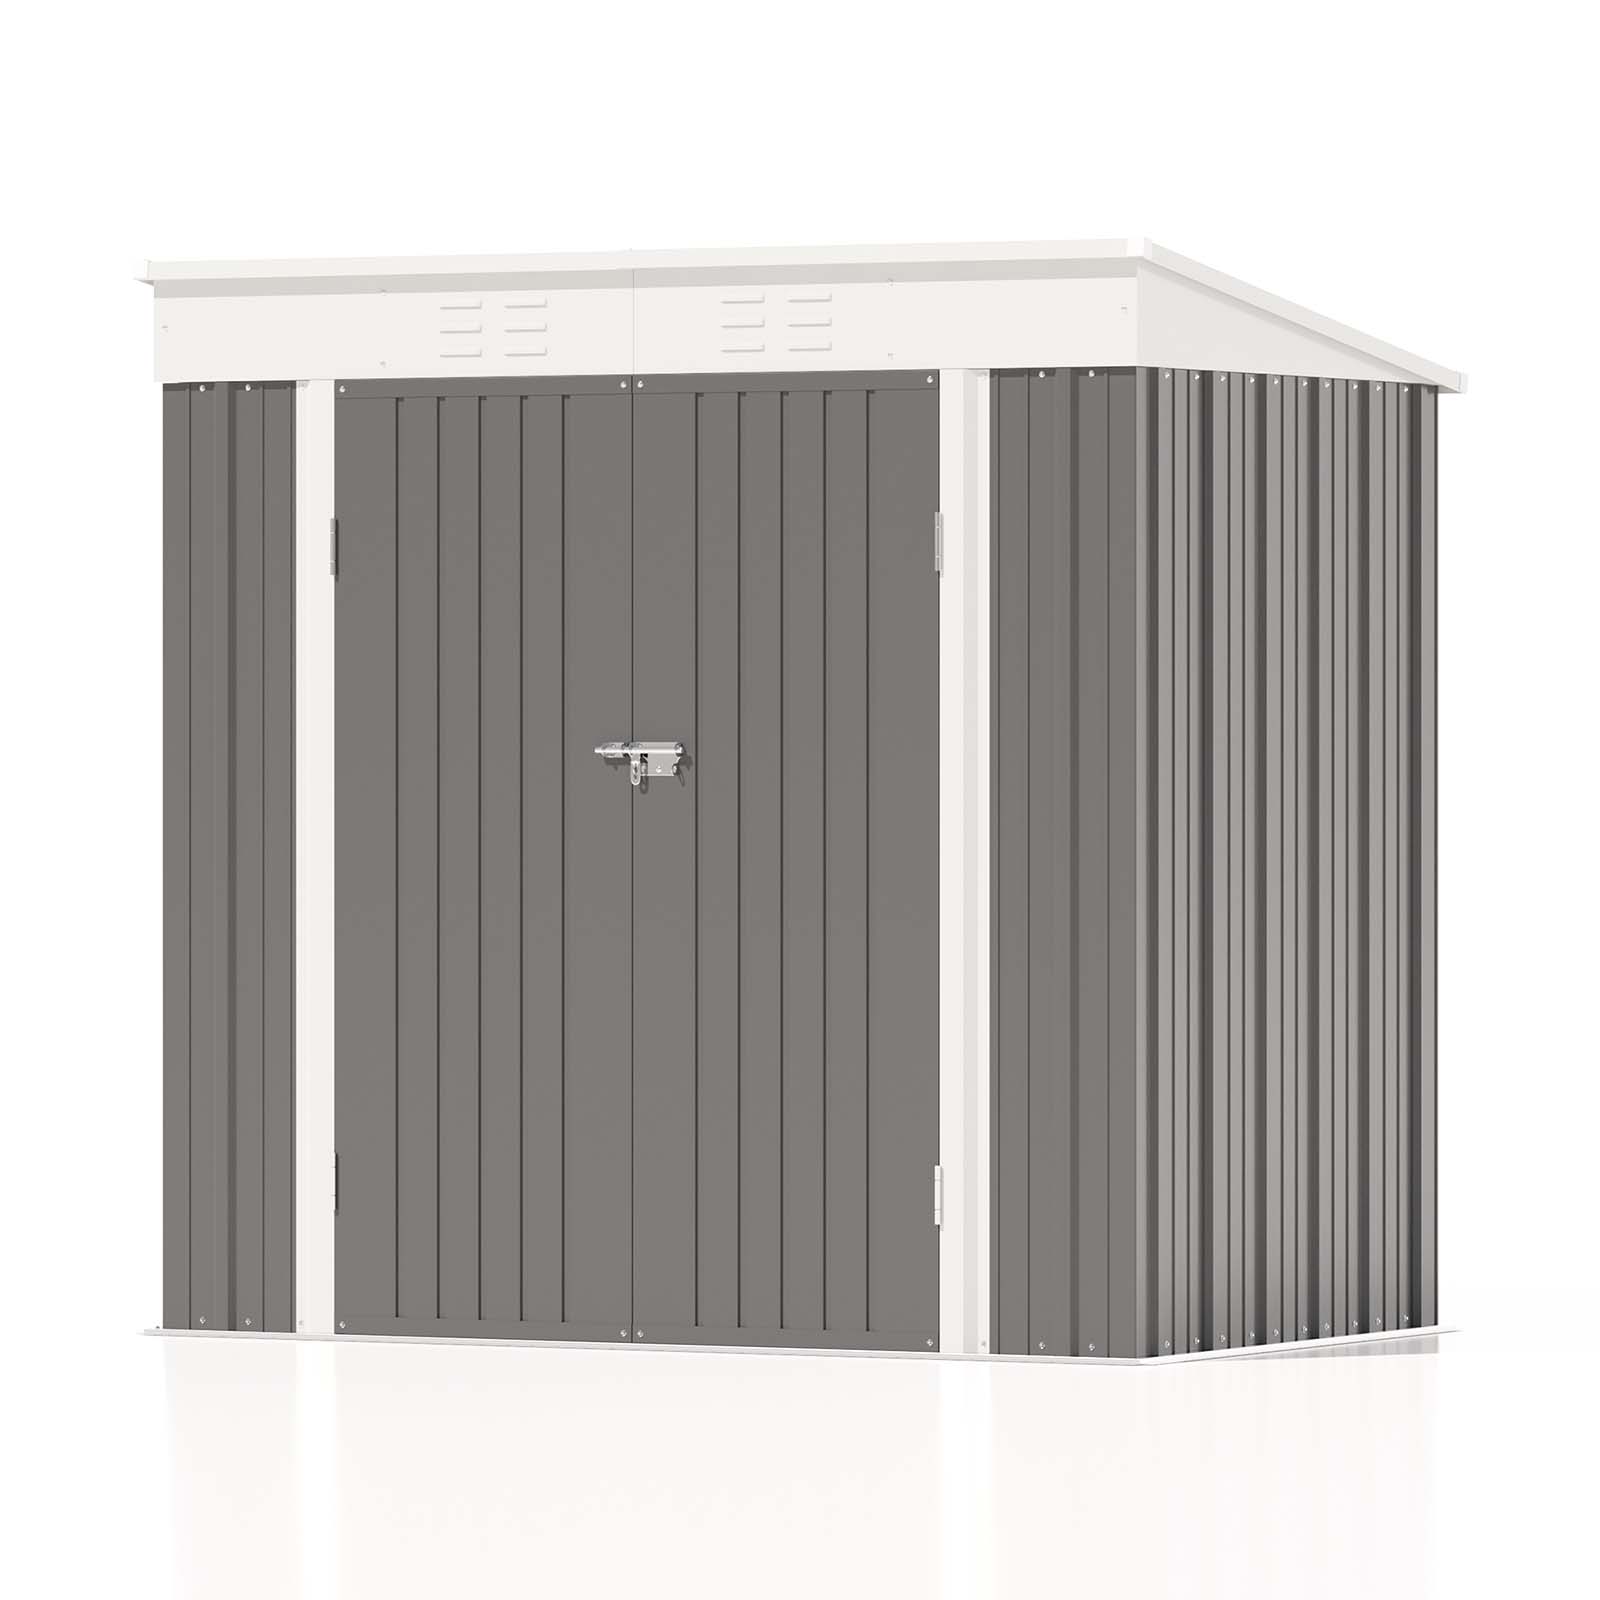 Patiowell 6x4 Metal Shed-Cool Gray